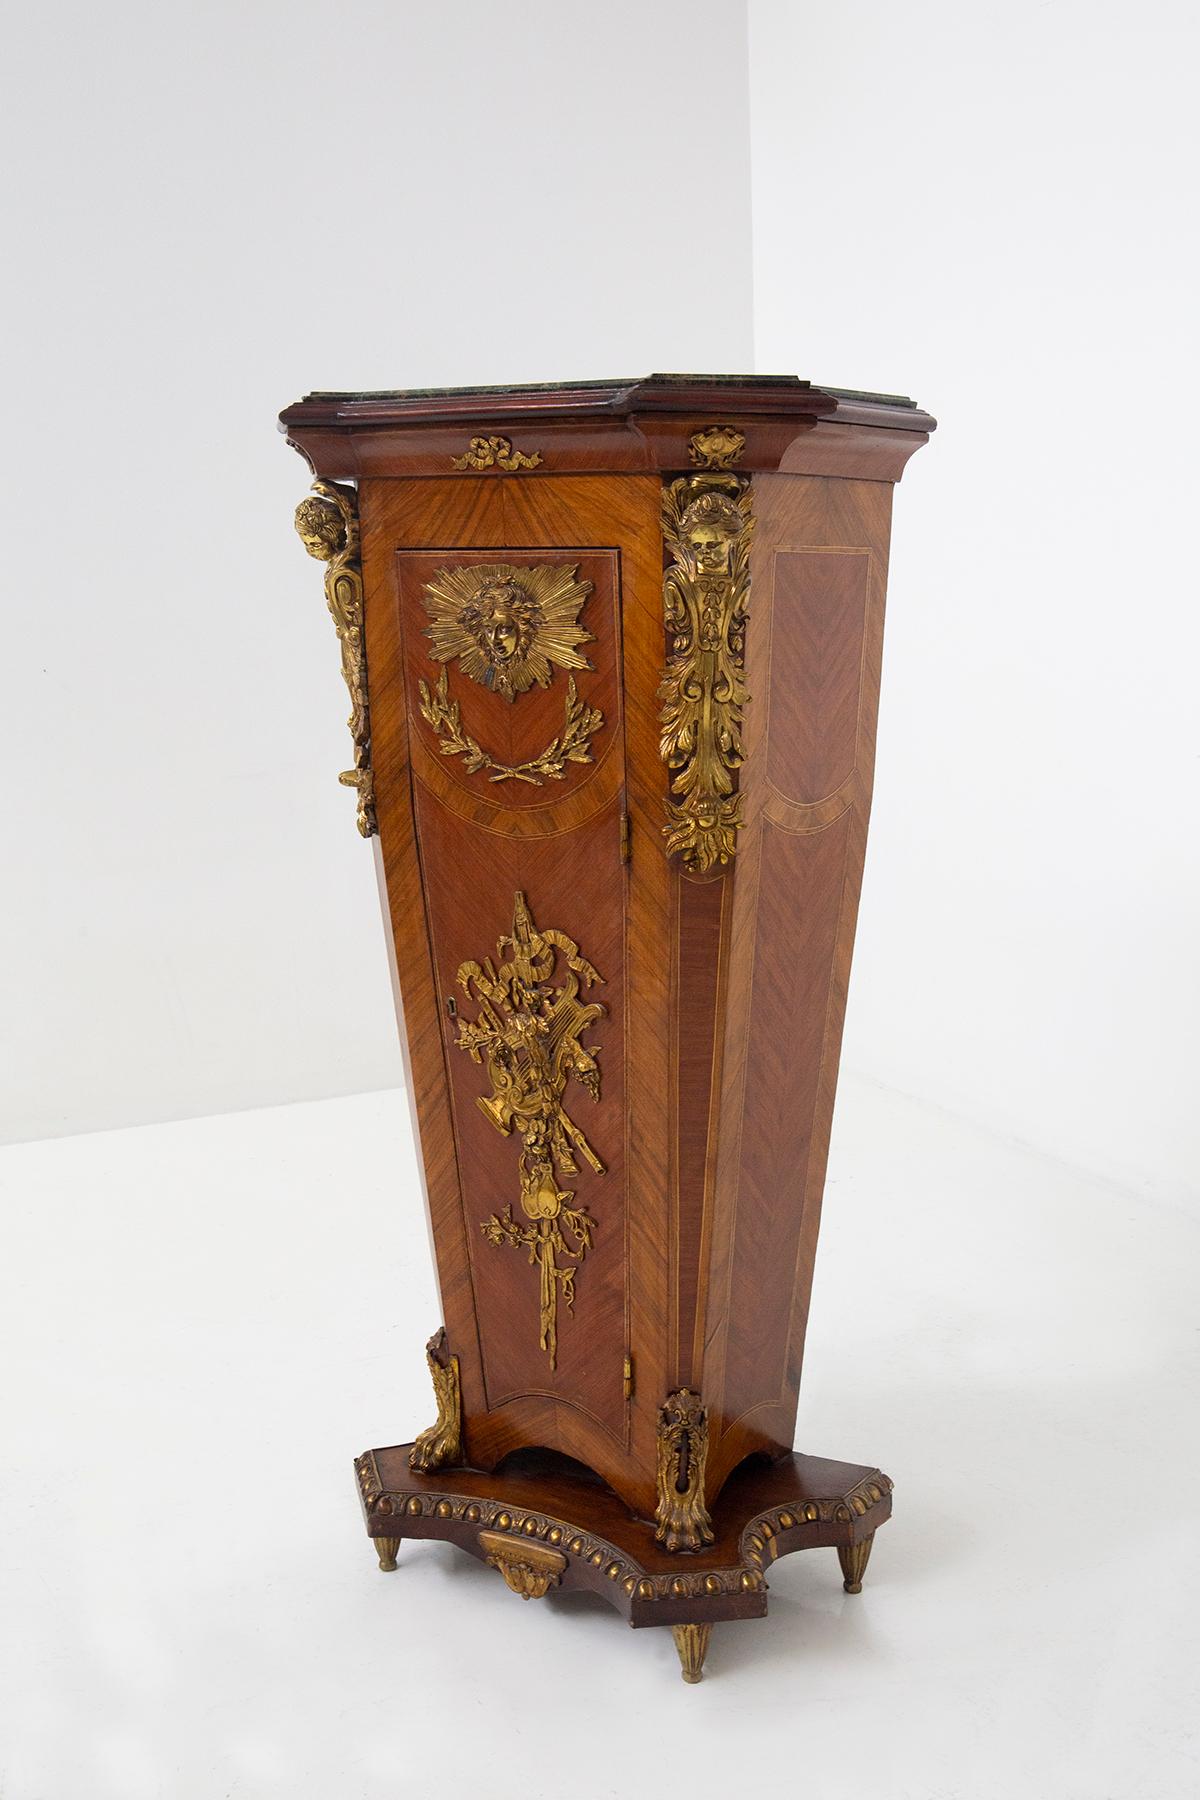 Transport yourself to a bygone era of opulence and grandeur with this elegant French pedestal in the style of Louis XVI. While its design harkens back to the 18th century, this exquisite piece of artistry likely hails from the late 19th to early